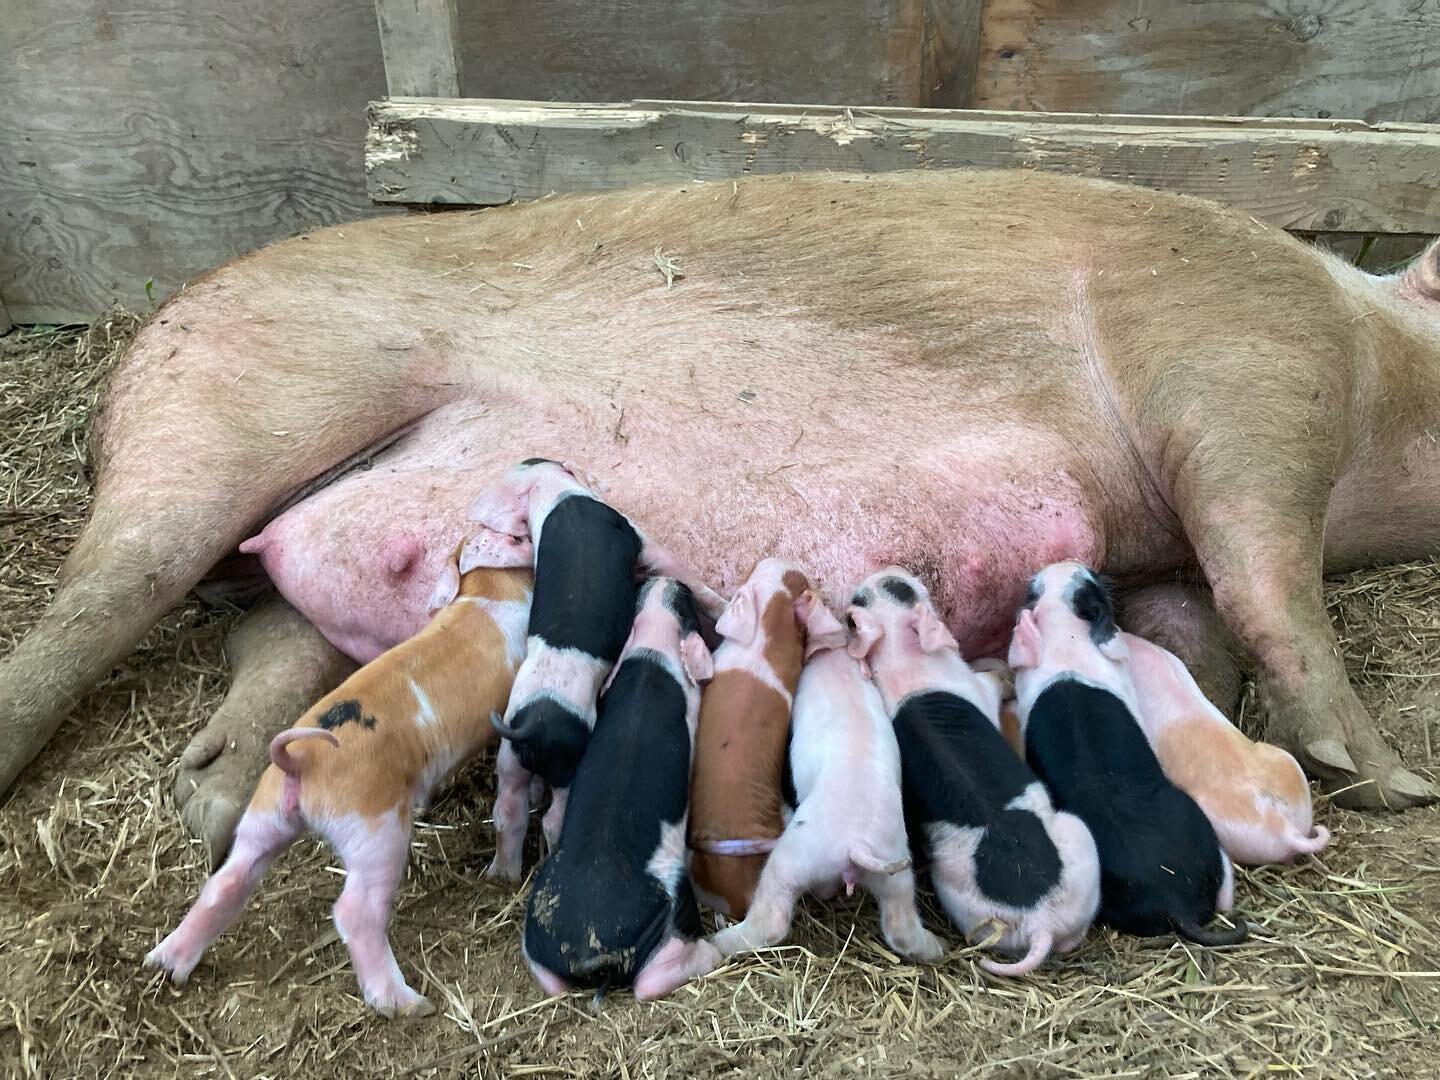 PIG(LET) UPDATE: Pearl had her litter this afternoon and did great ~ Max came in to the other half of the divided caterpillar tunnel during the rain to nurse her piglets, and it&rsquo;s striking to see the growth difference of 5 weeks. Fern&rsquo;s u